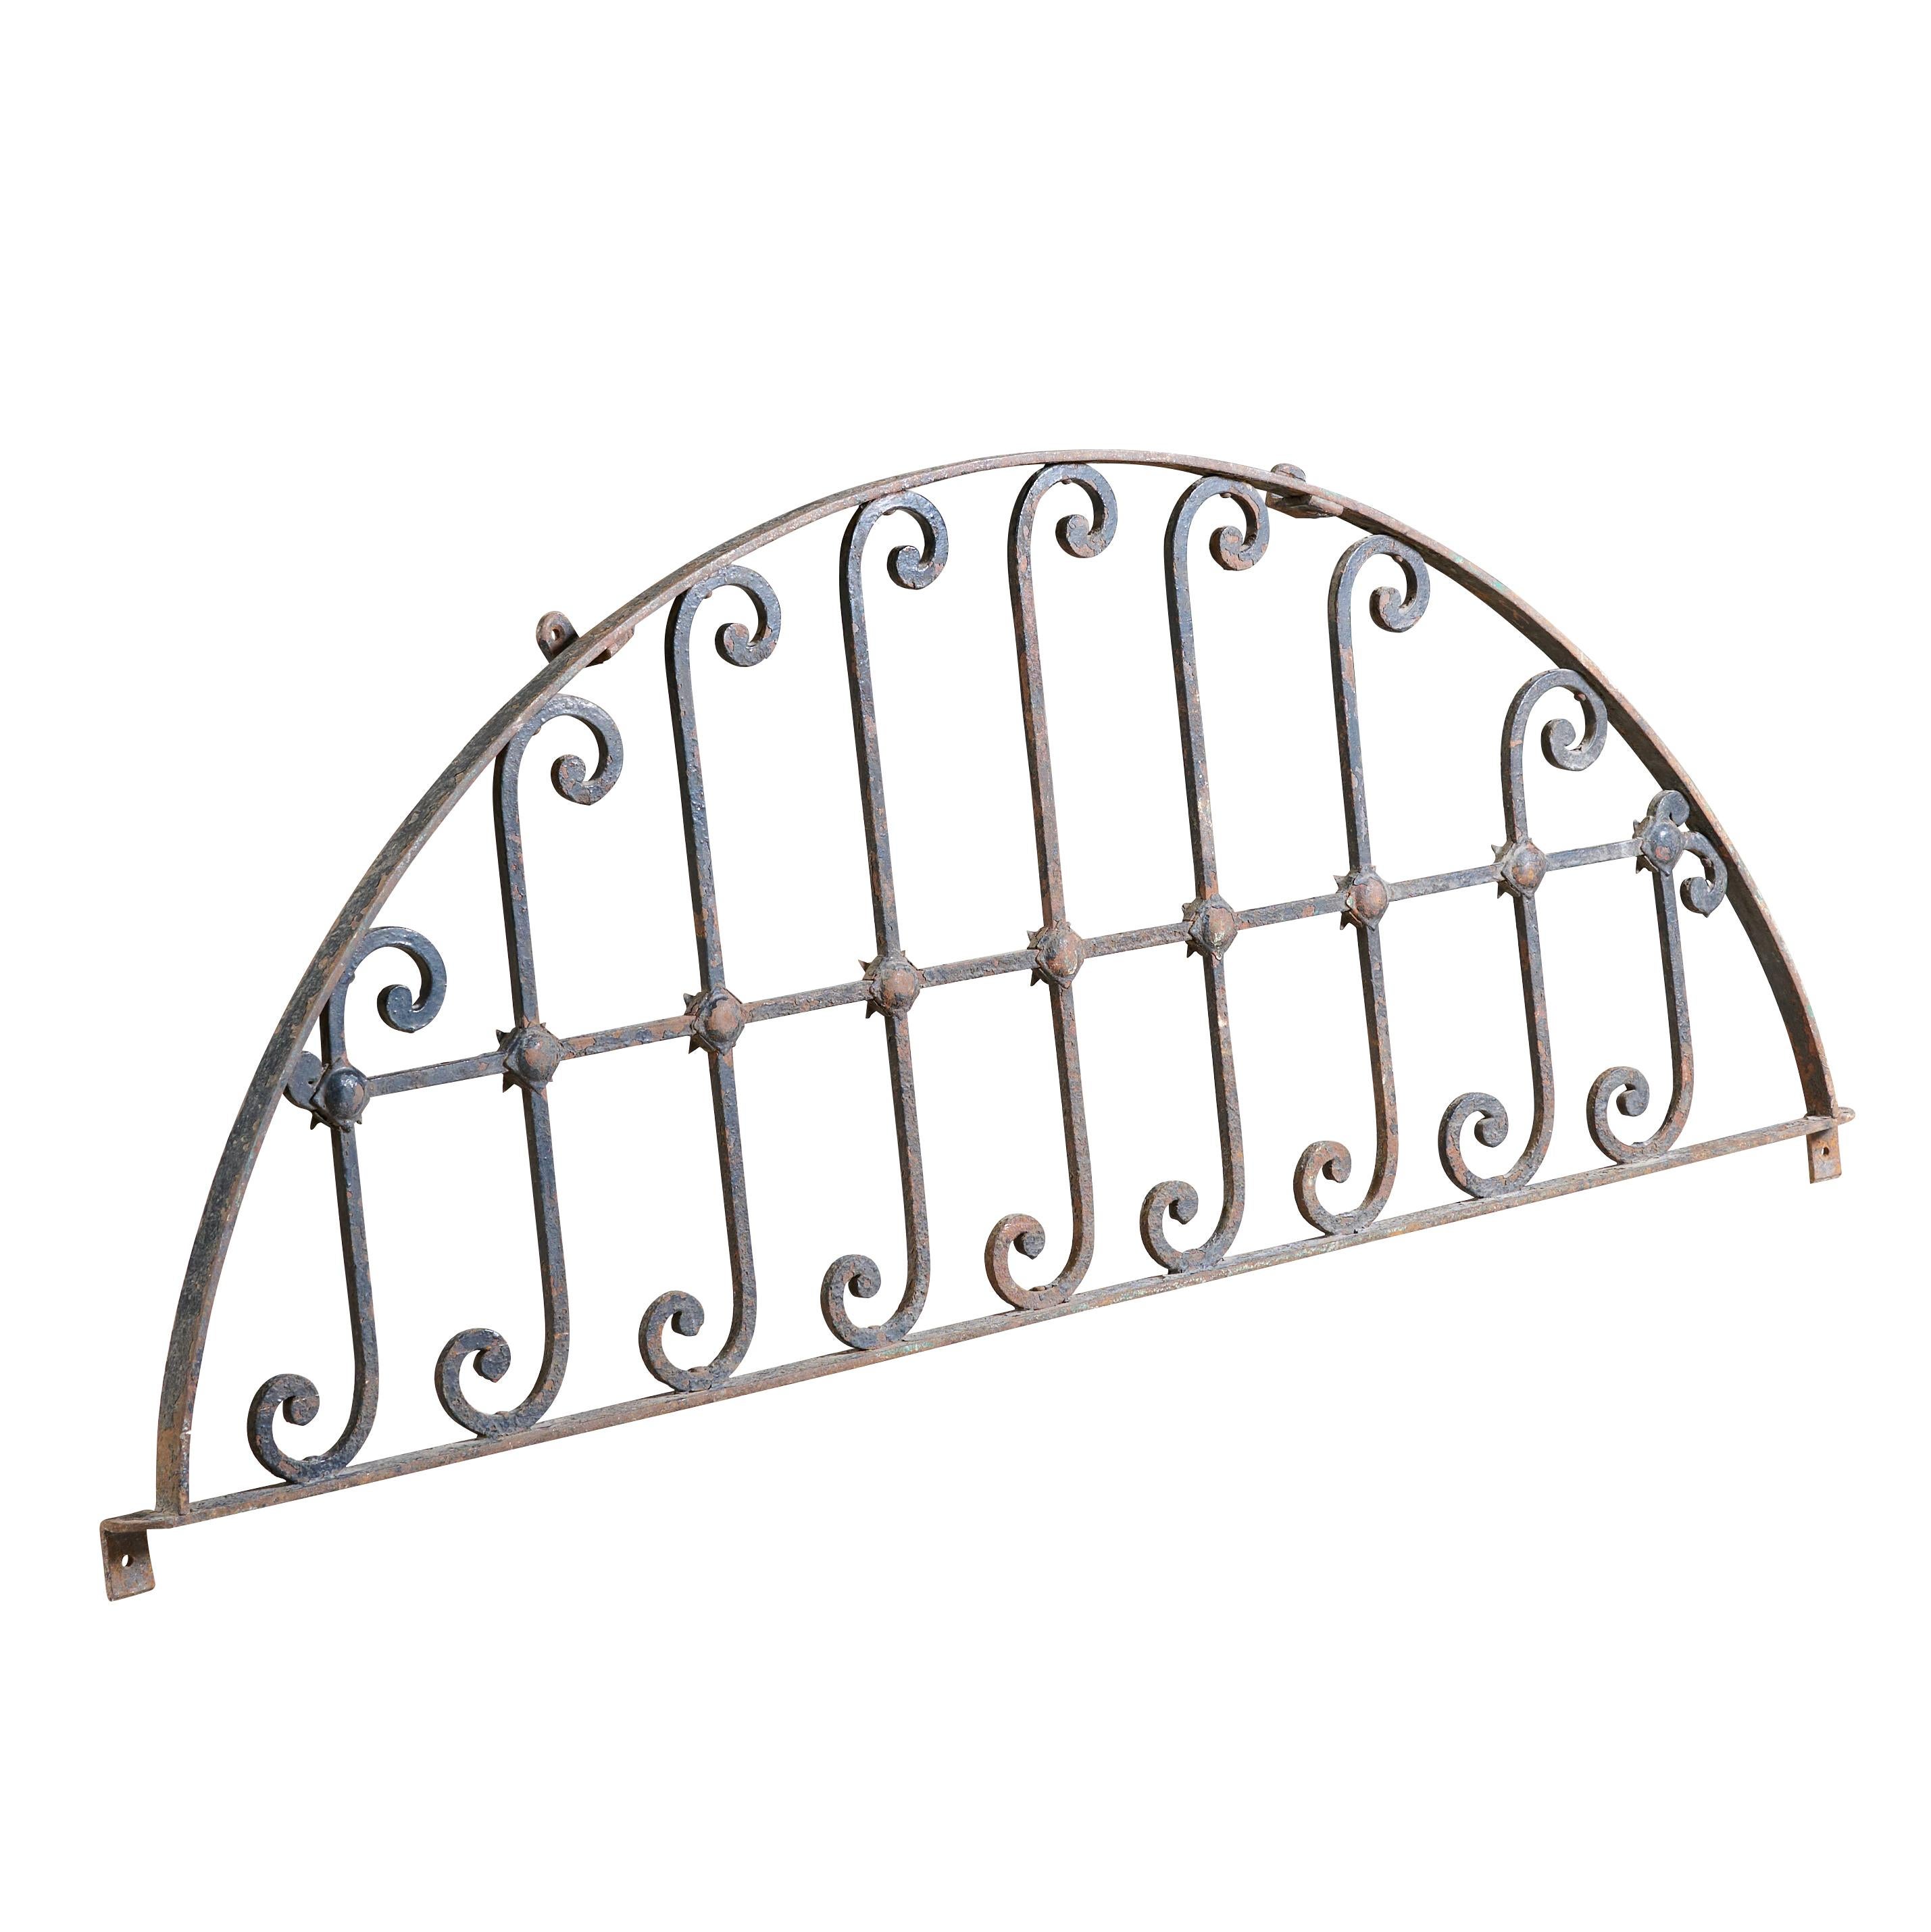 American Wrought Iron Decorative Arched Grill For Sale